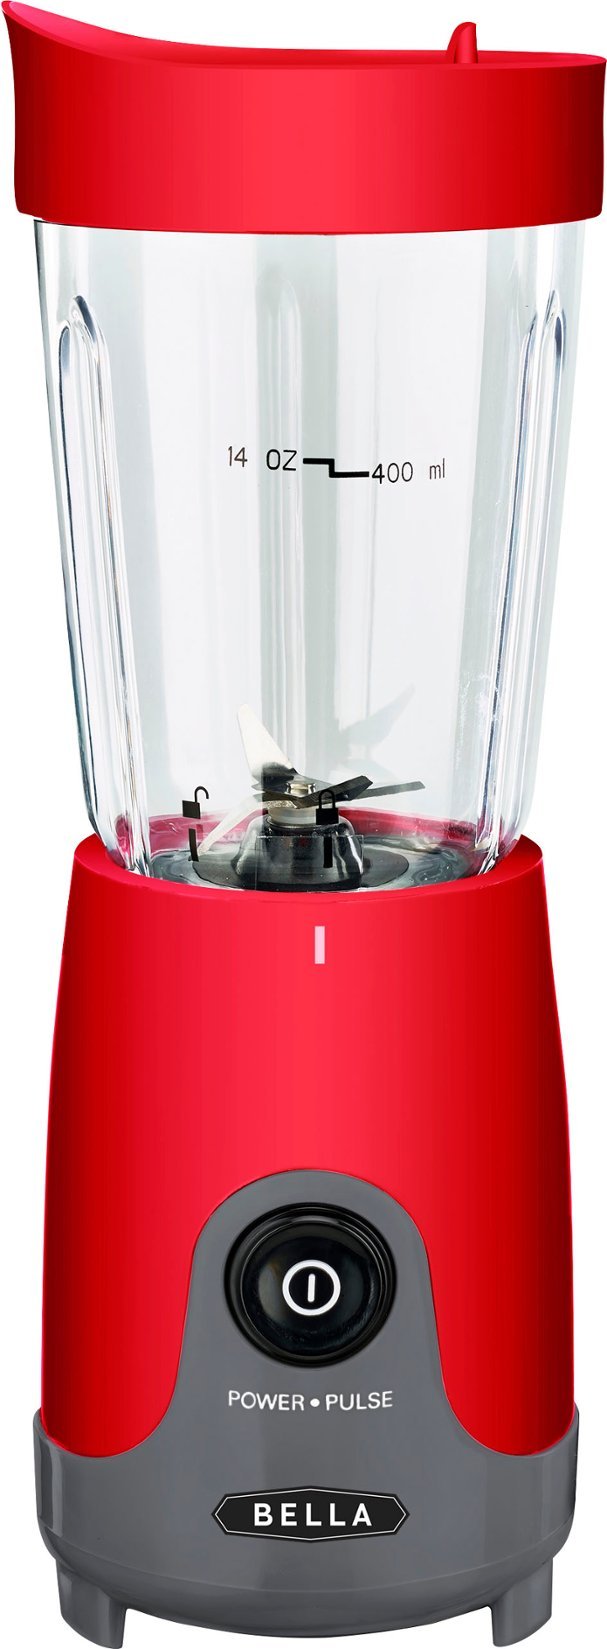 14-Oz. Bella Personal Blender (Red) $9 + Free Shipping